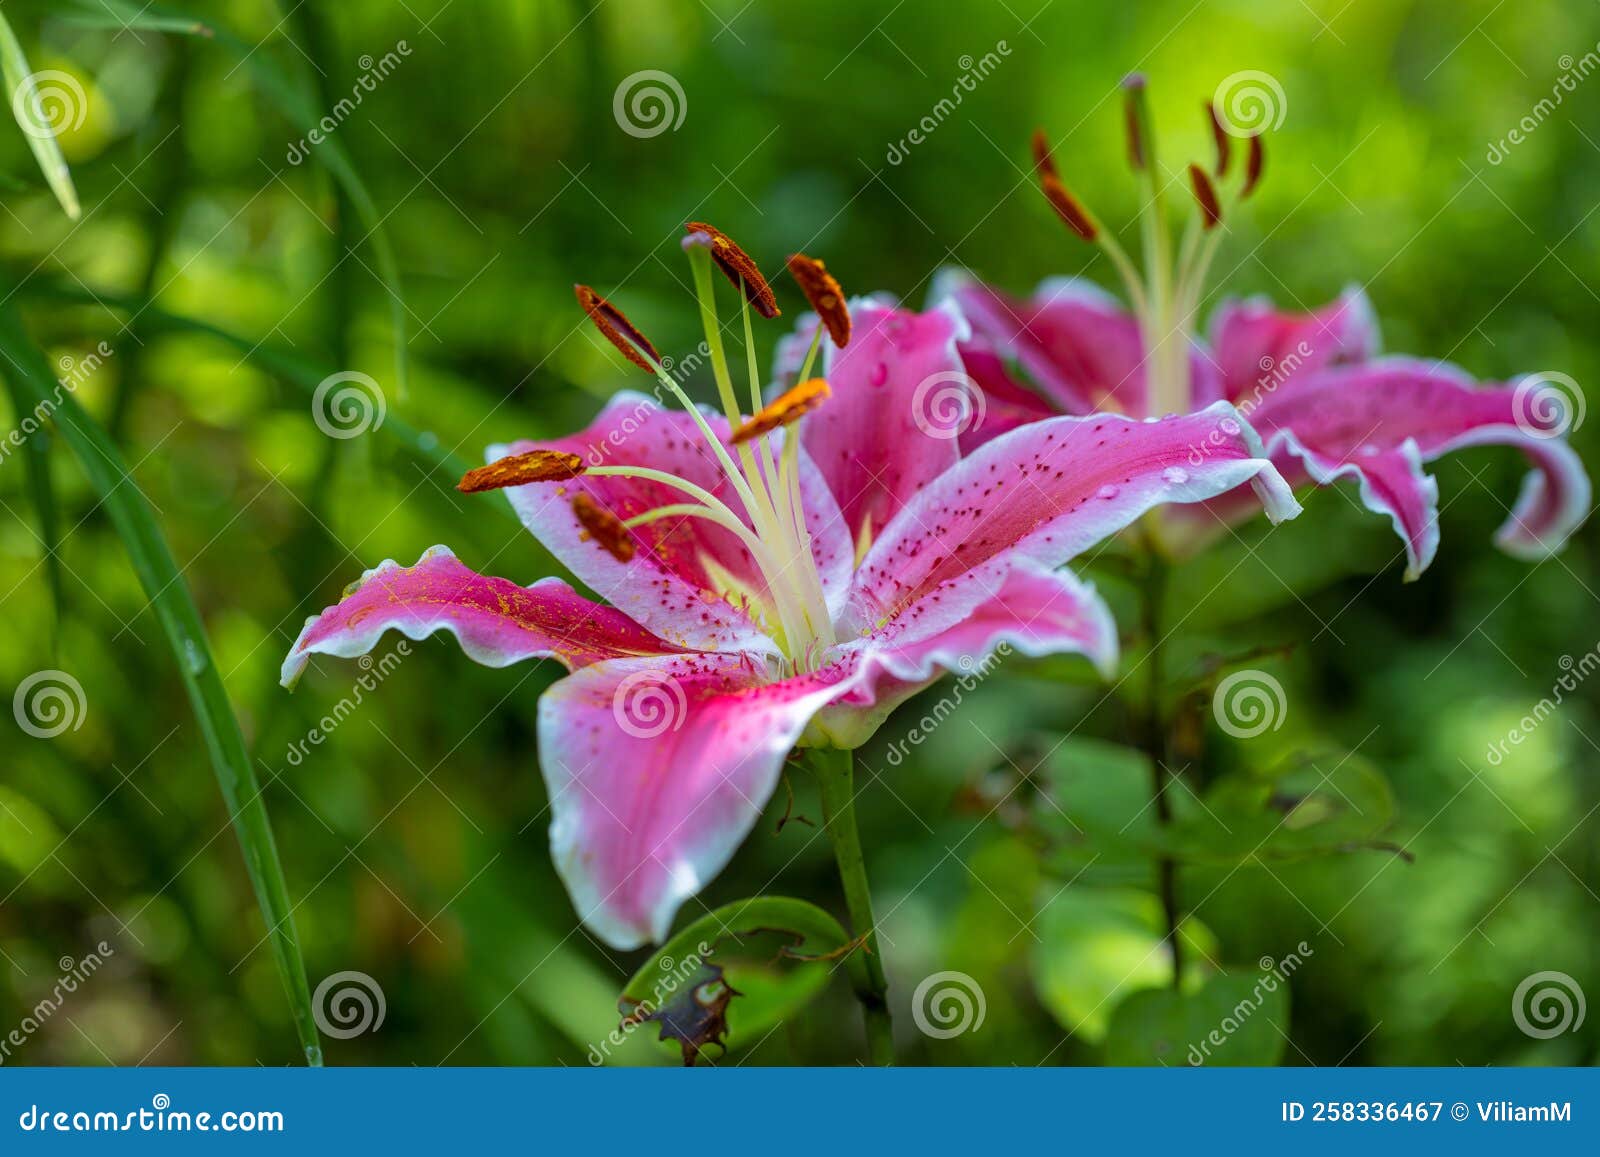 Stargazer Lily Flower in Close Up View with Blurred Background Stock ...